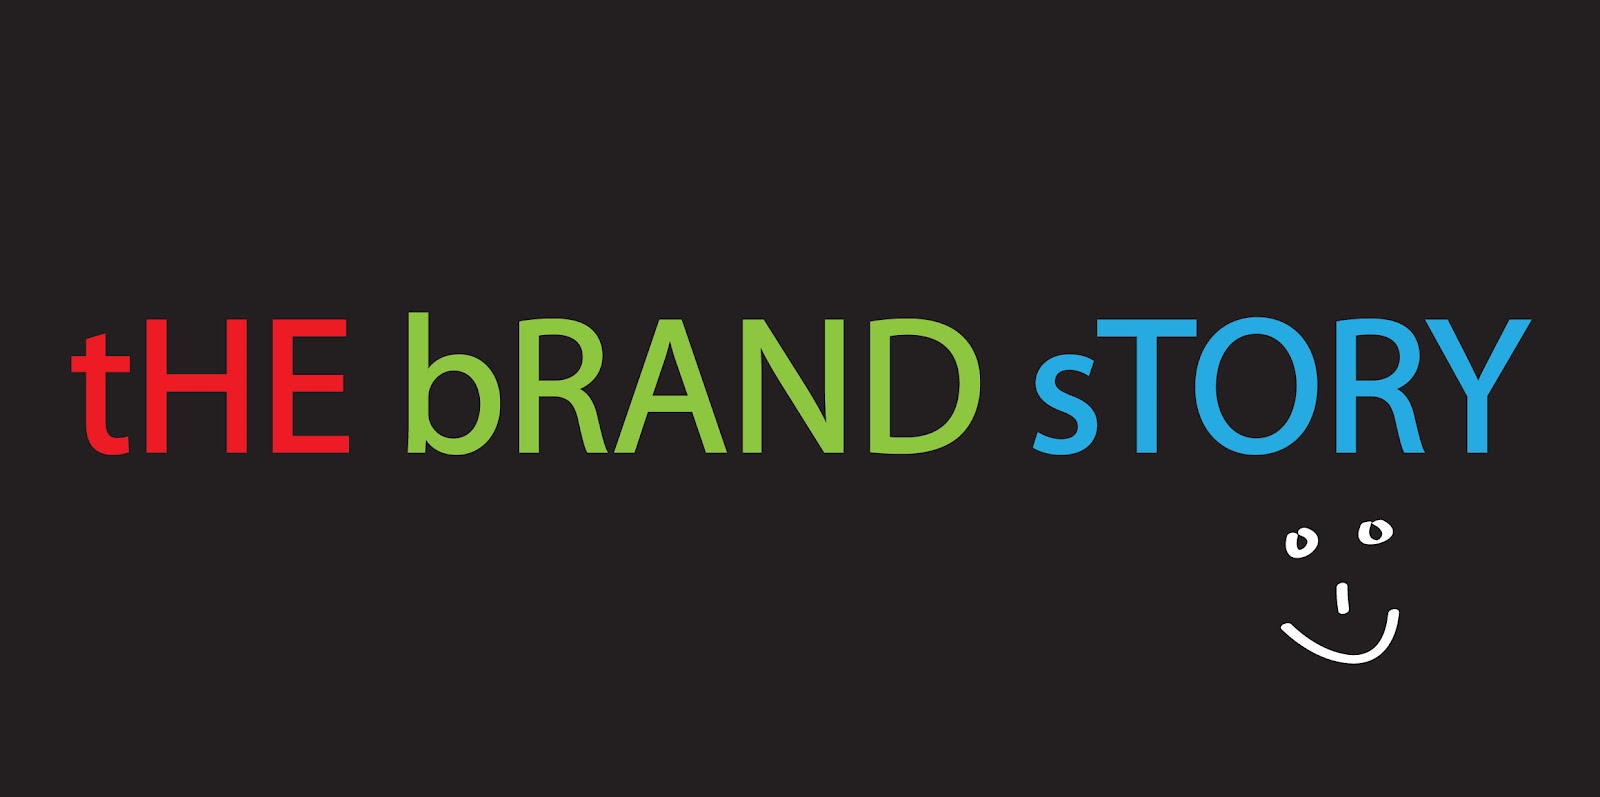 What's a Brand Story